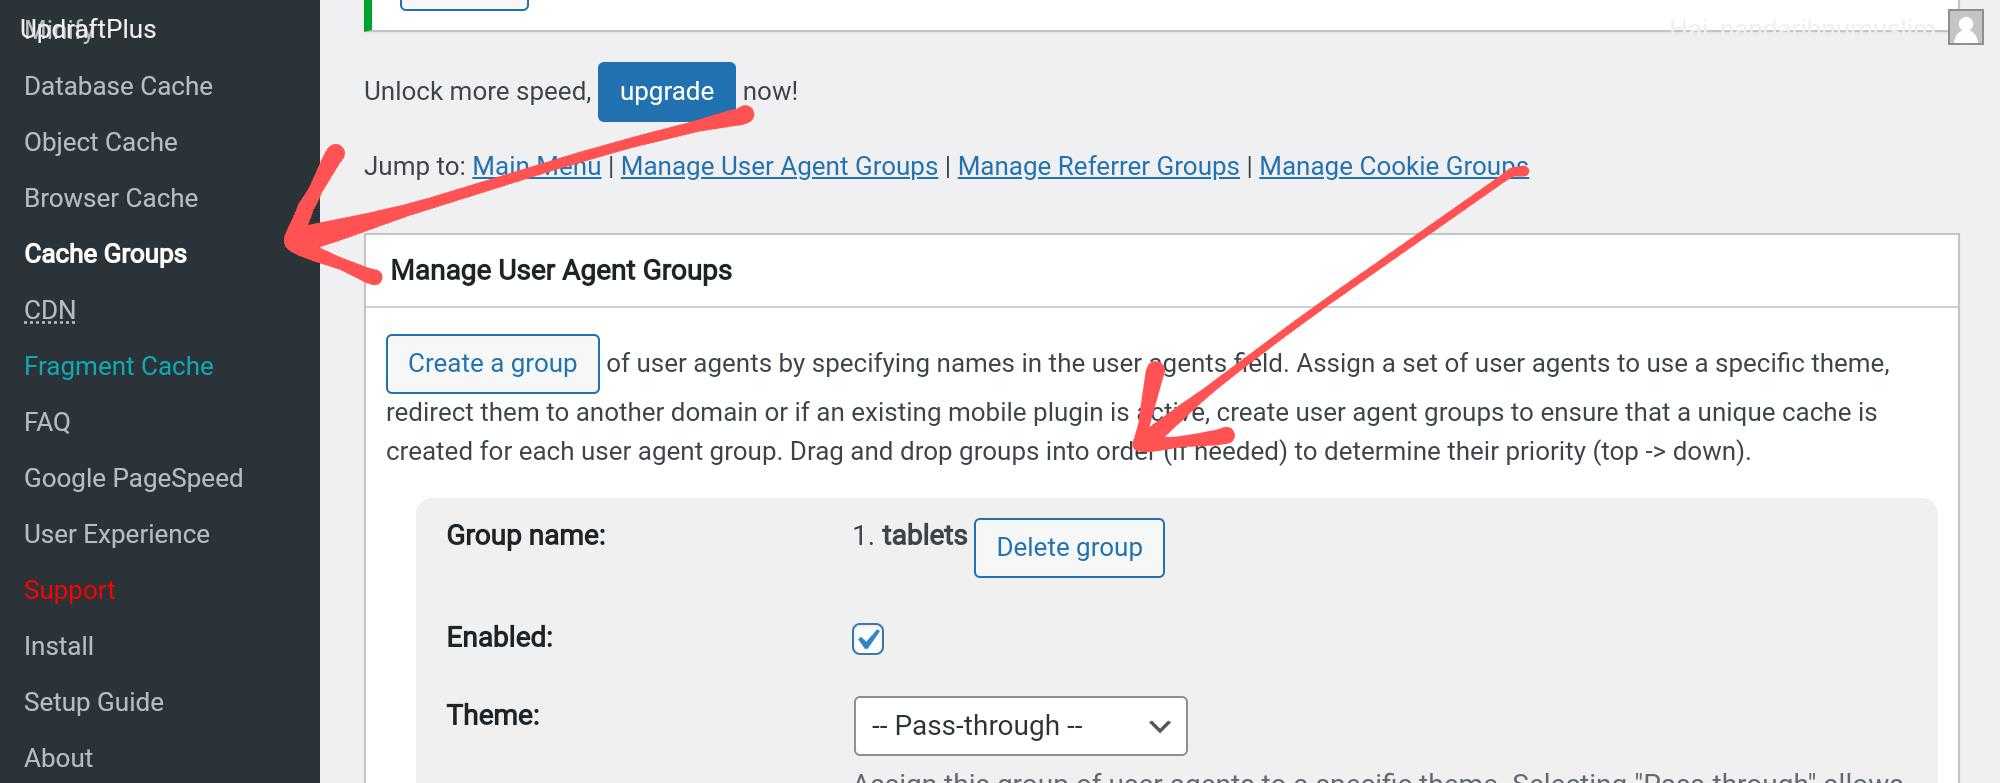 Object Cache Groups